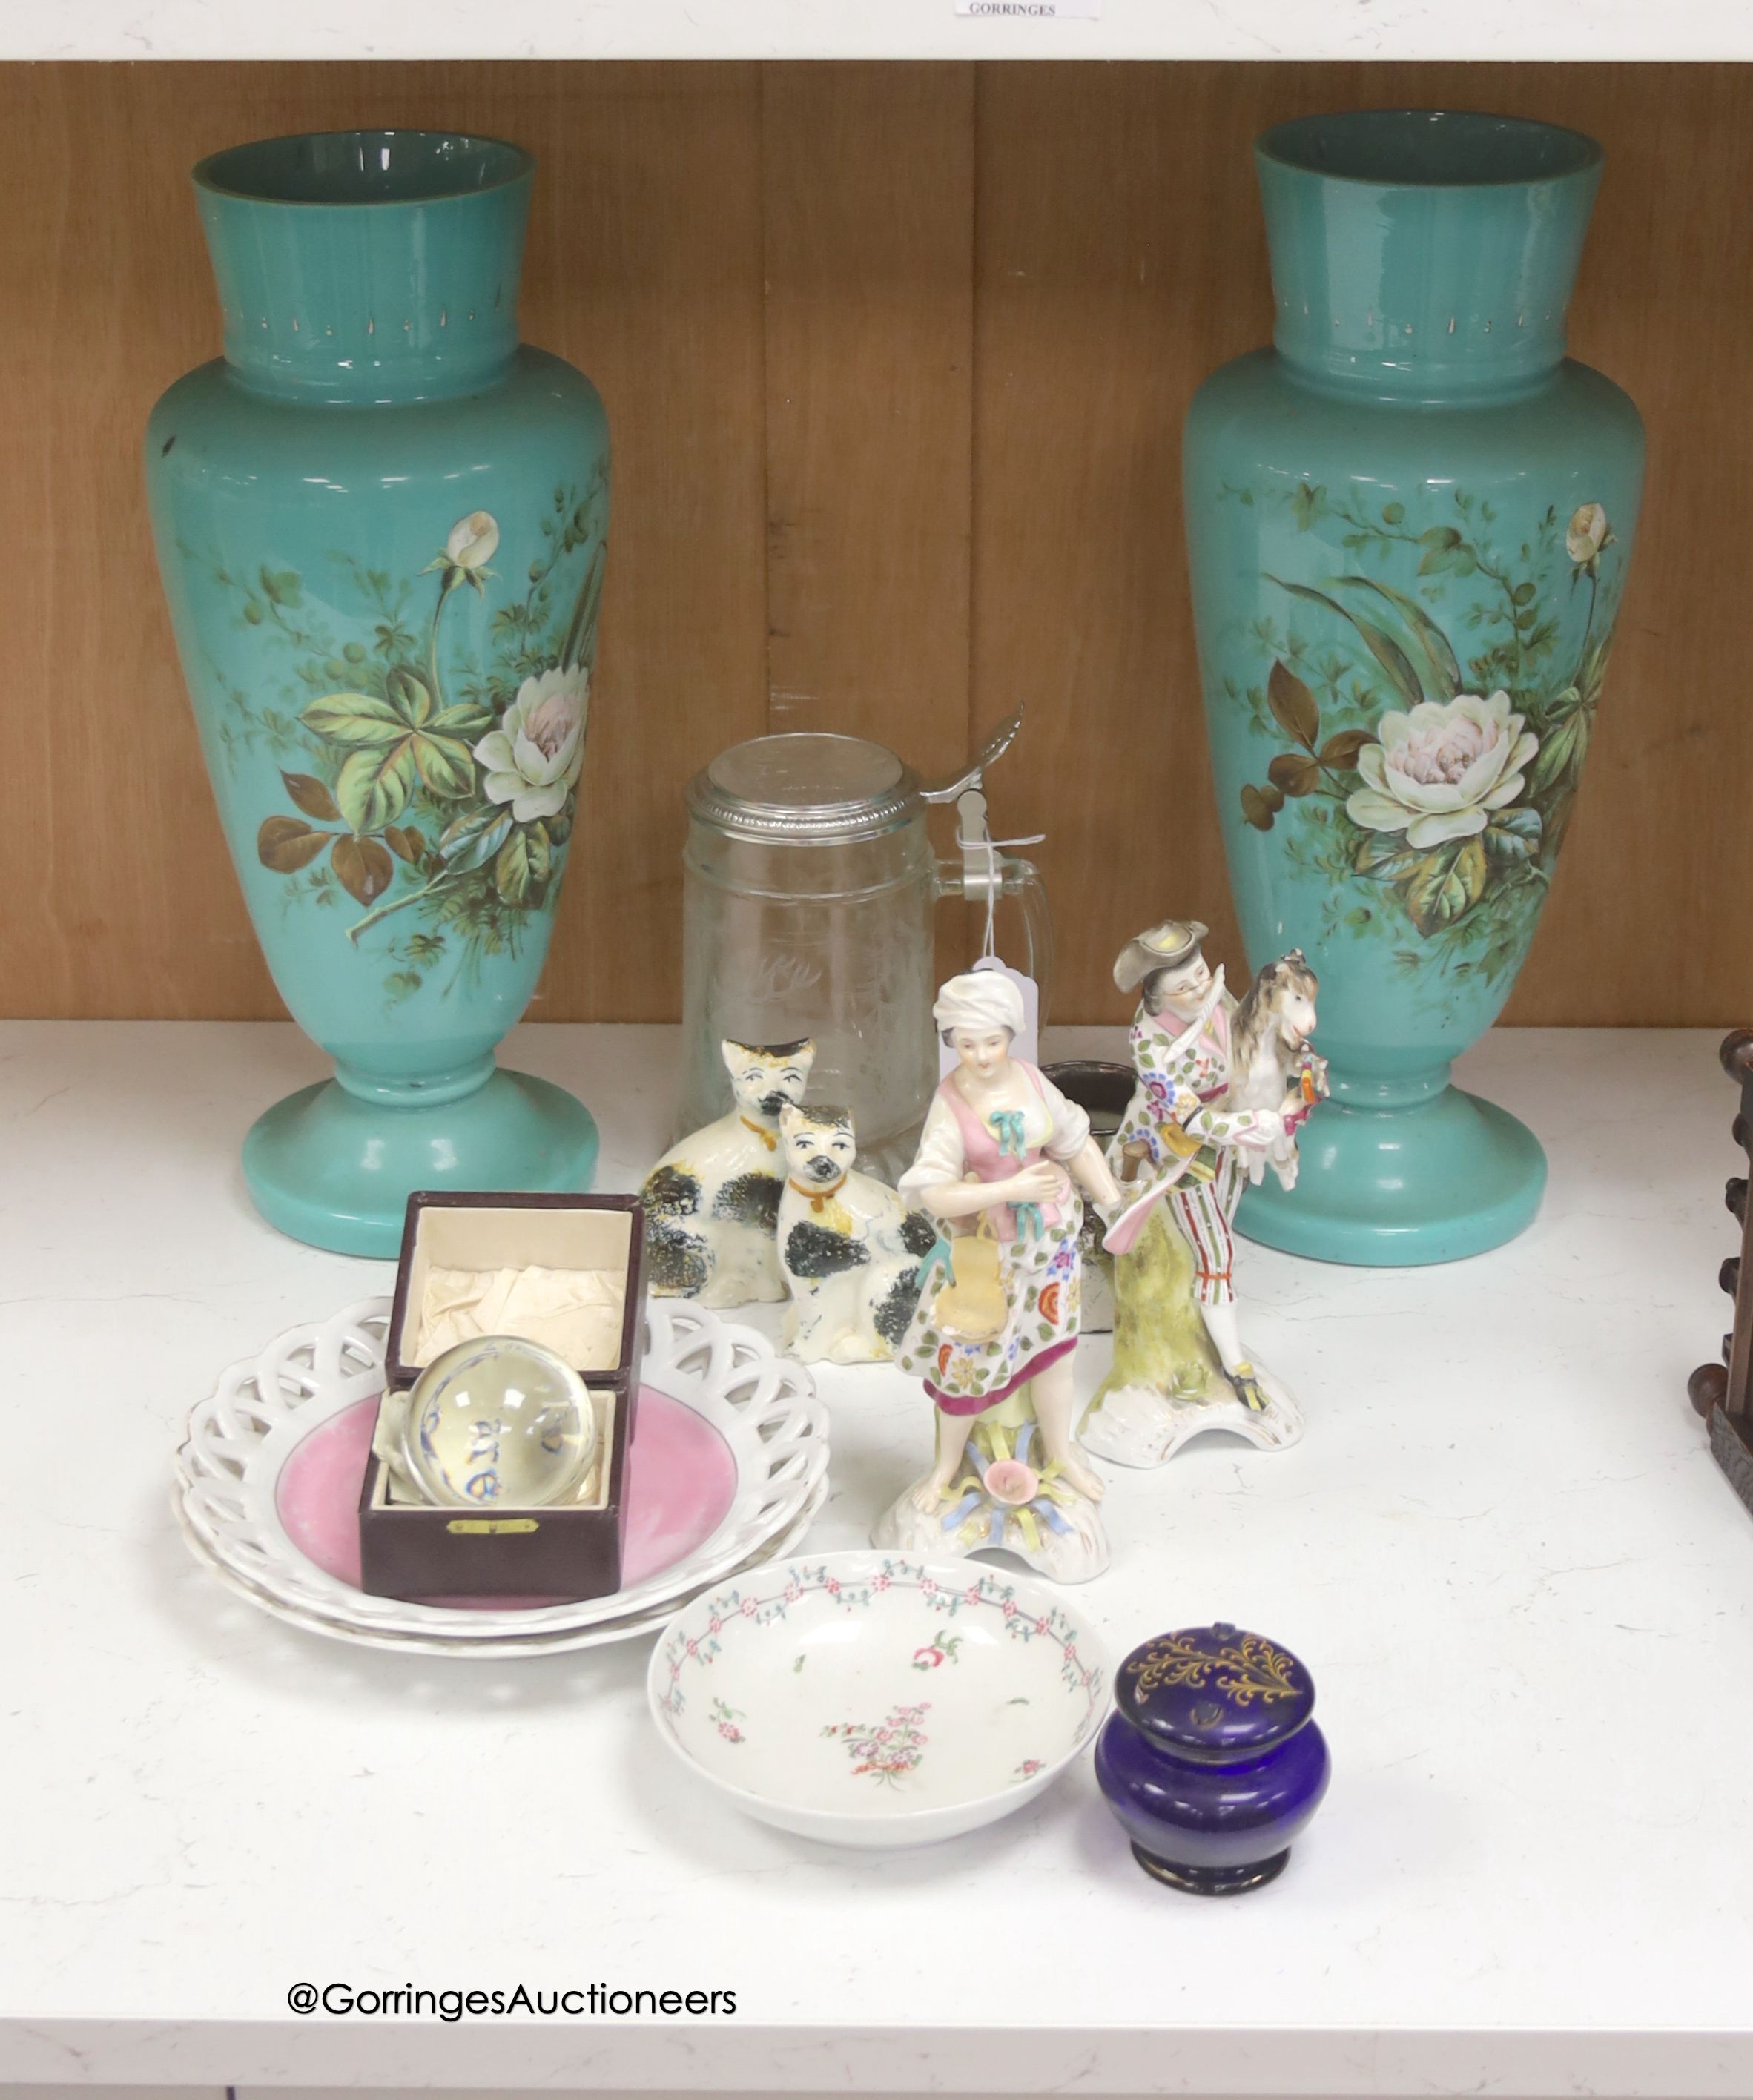 A pair of Sitzendorf porcelain figures, a pair of green vases and a clairvoyance crystal with instructions etc